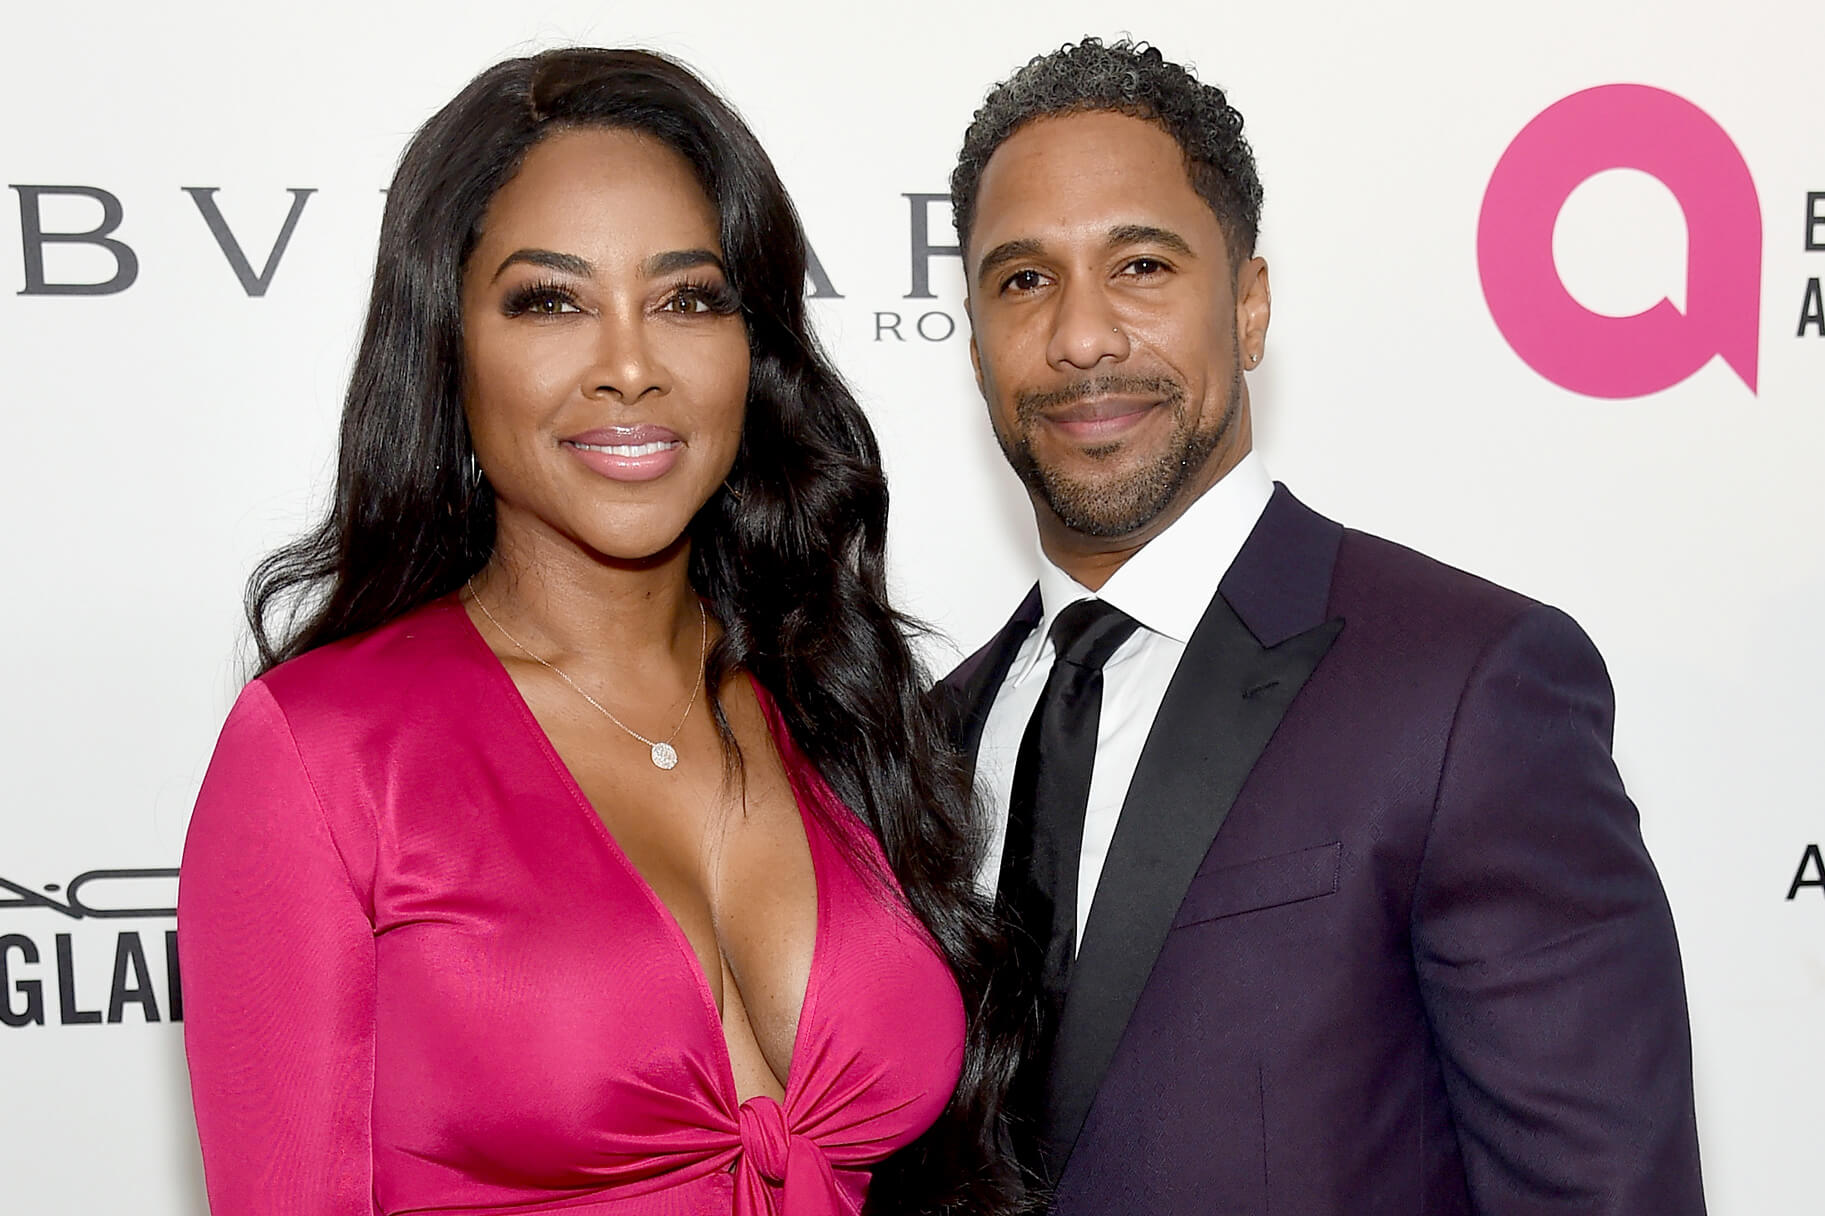 Kenya Moore Rushed To Court To Demand Marc Daly Divorce Proceedings Be Sealed Days Ahead Of ’DWTS’ Debut!